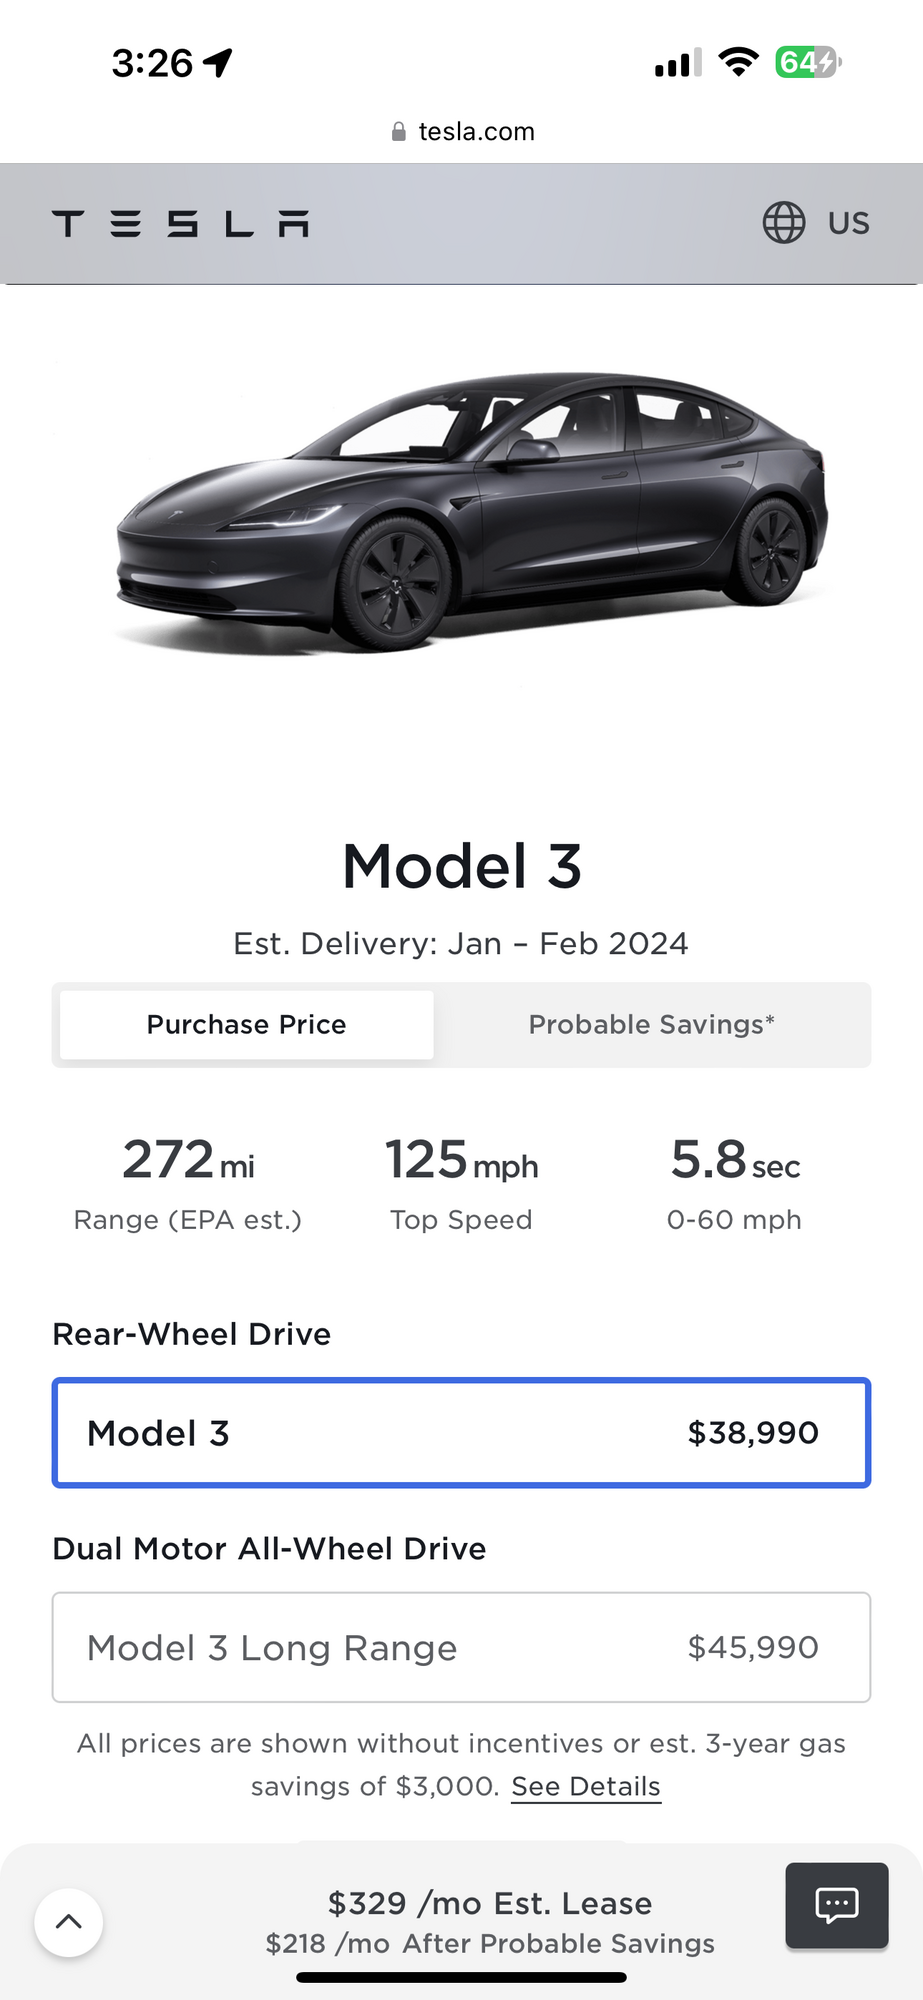 Tesla launches Model 3 Highland refresh in North America